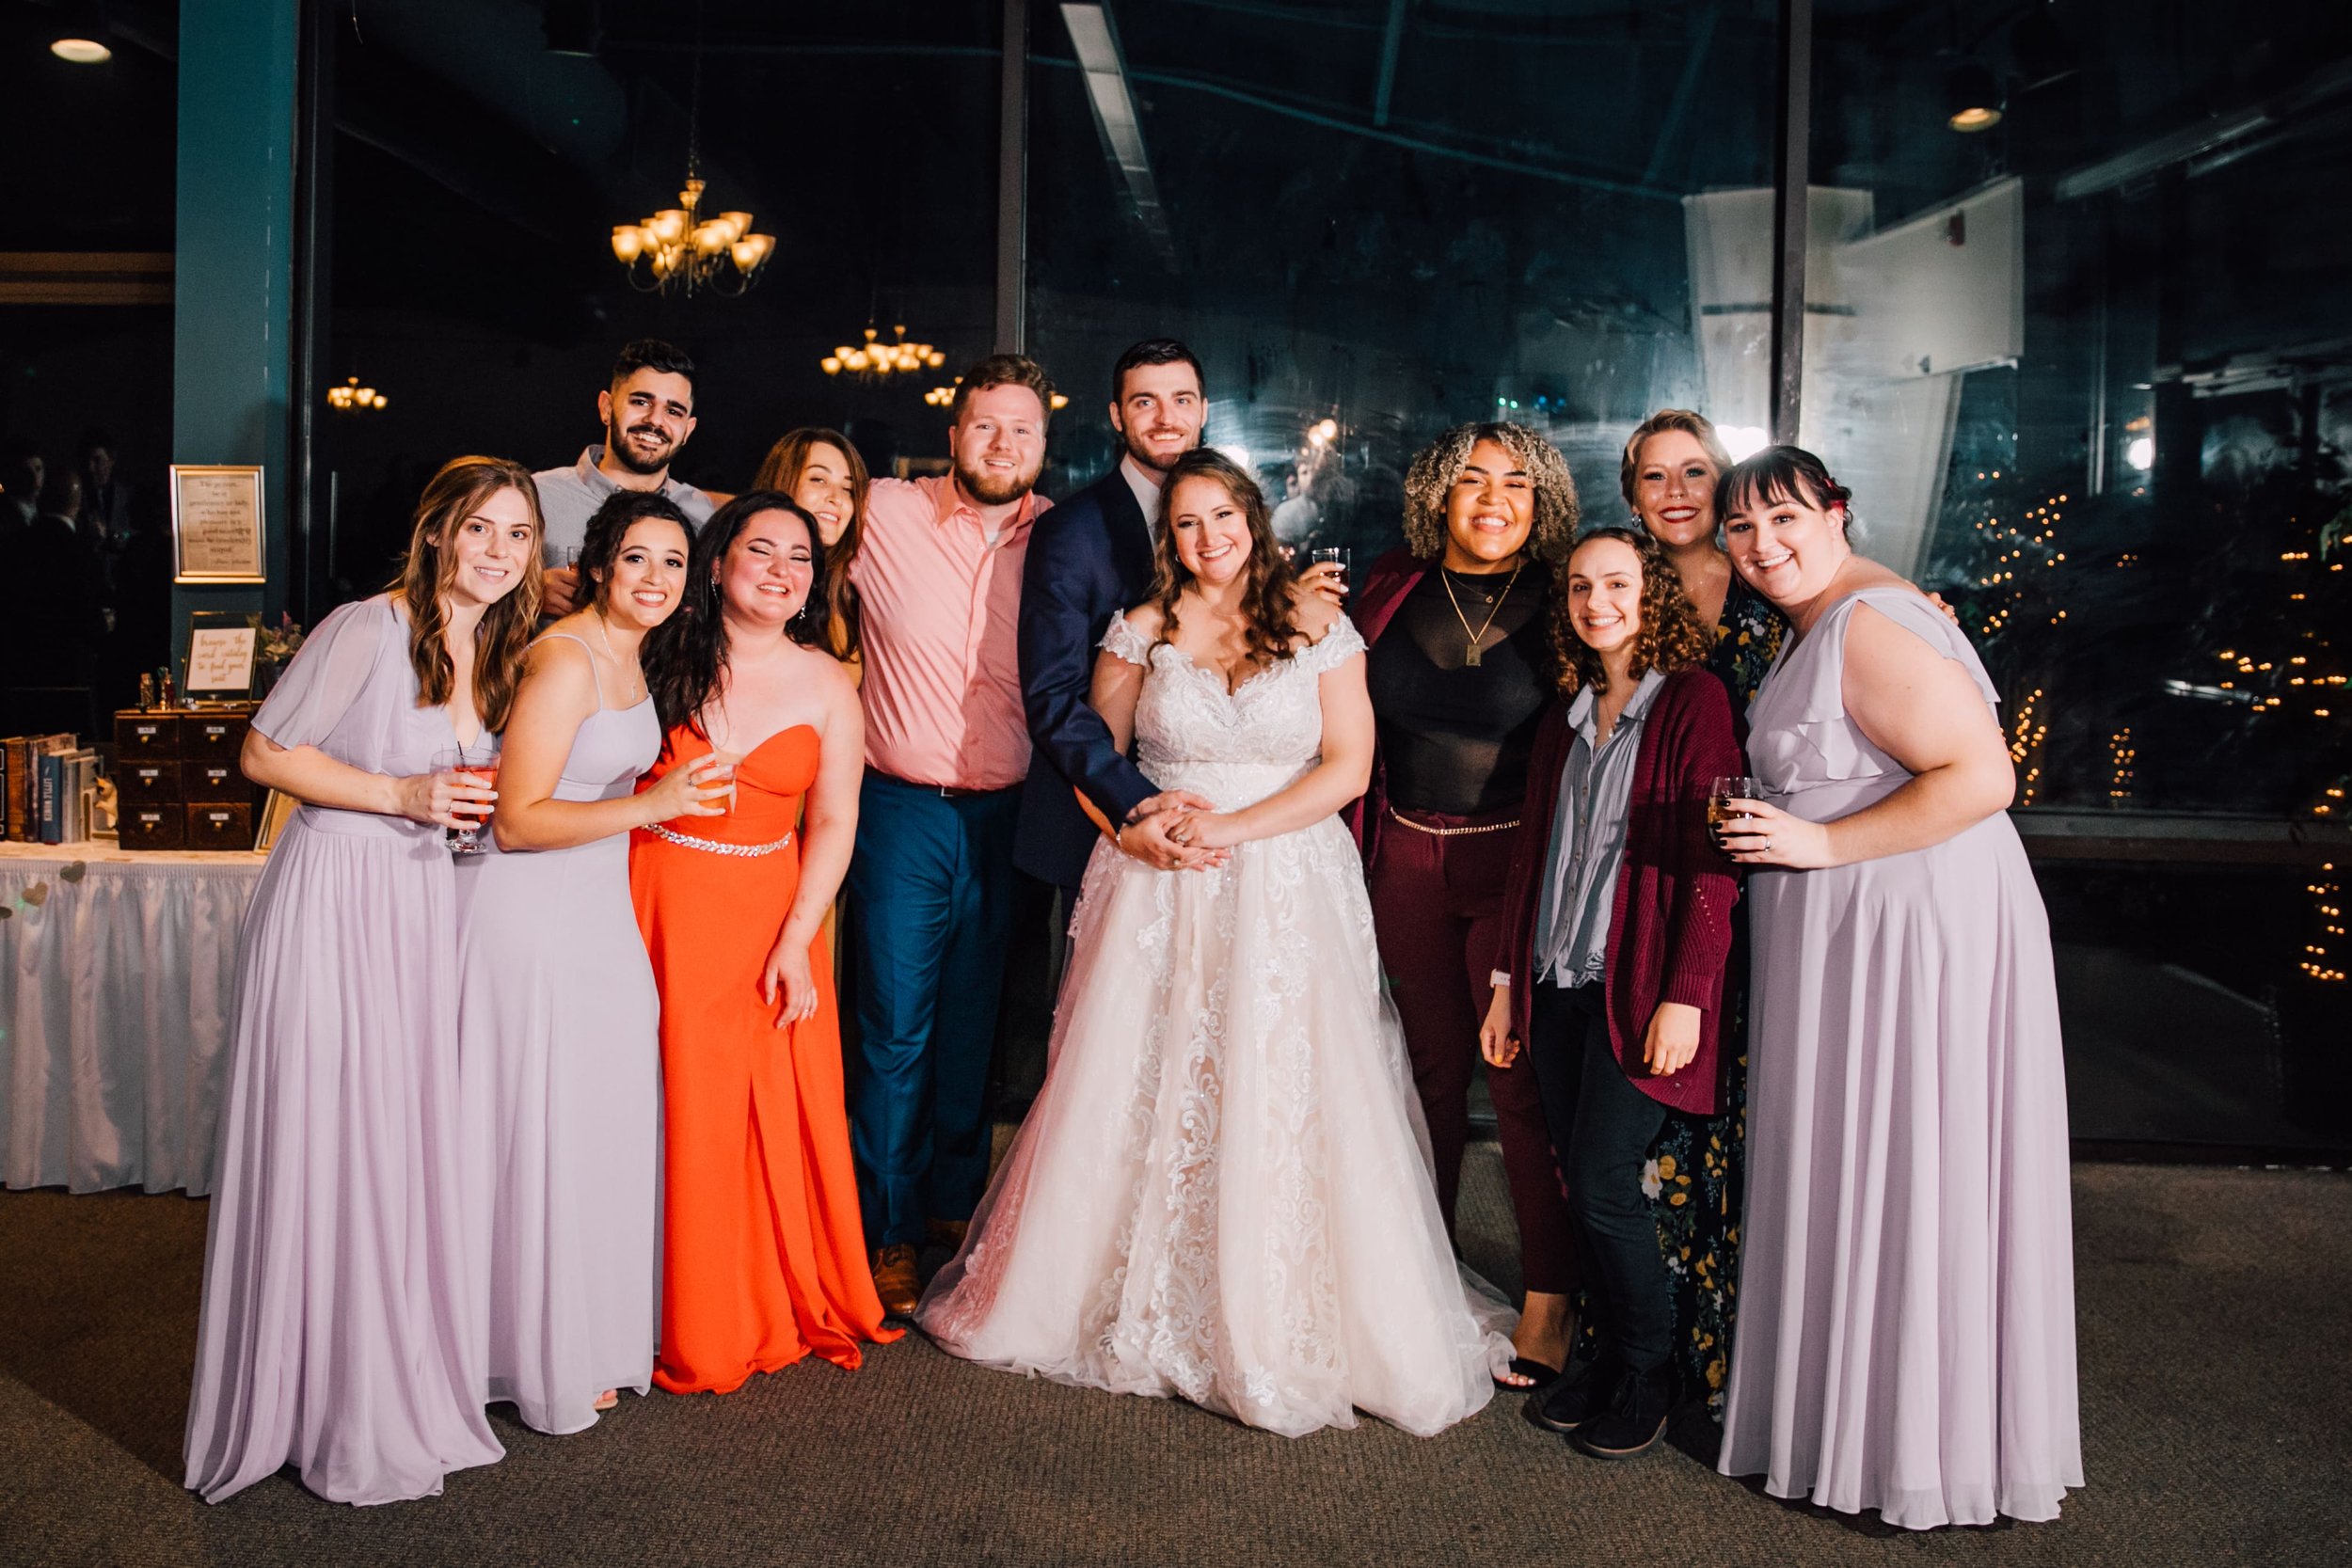  the bride and groom smile with their college friends, wedding photographer included, at endwell greens 